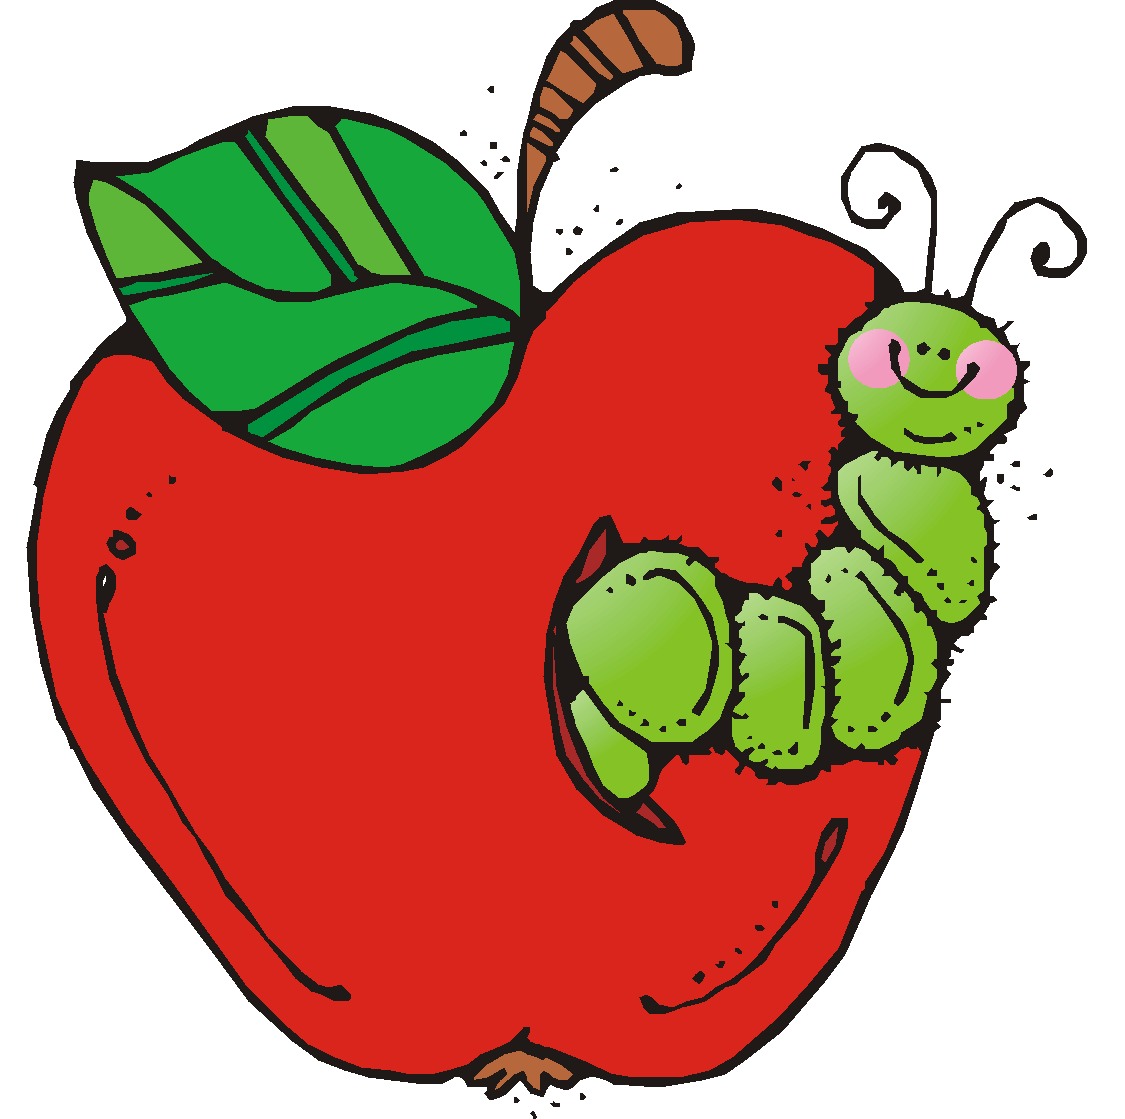 Worm Clipart ... File Type .